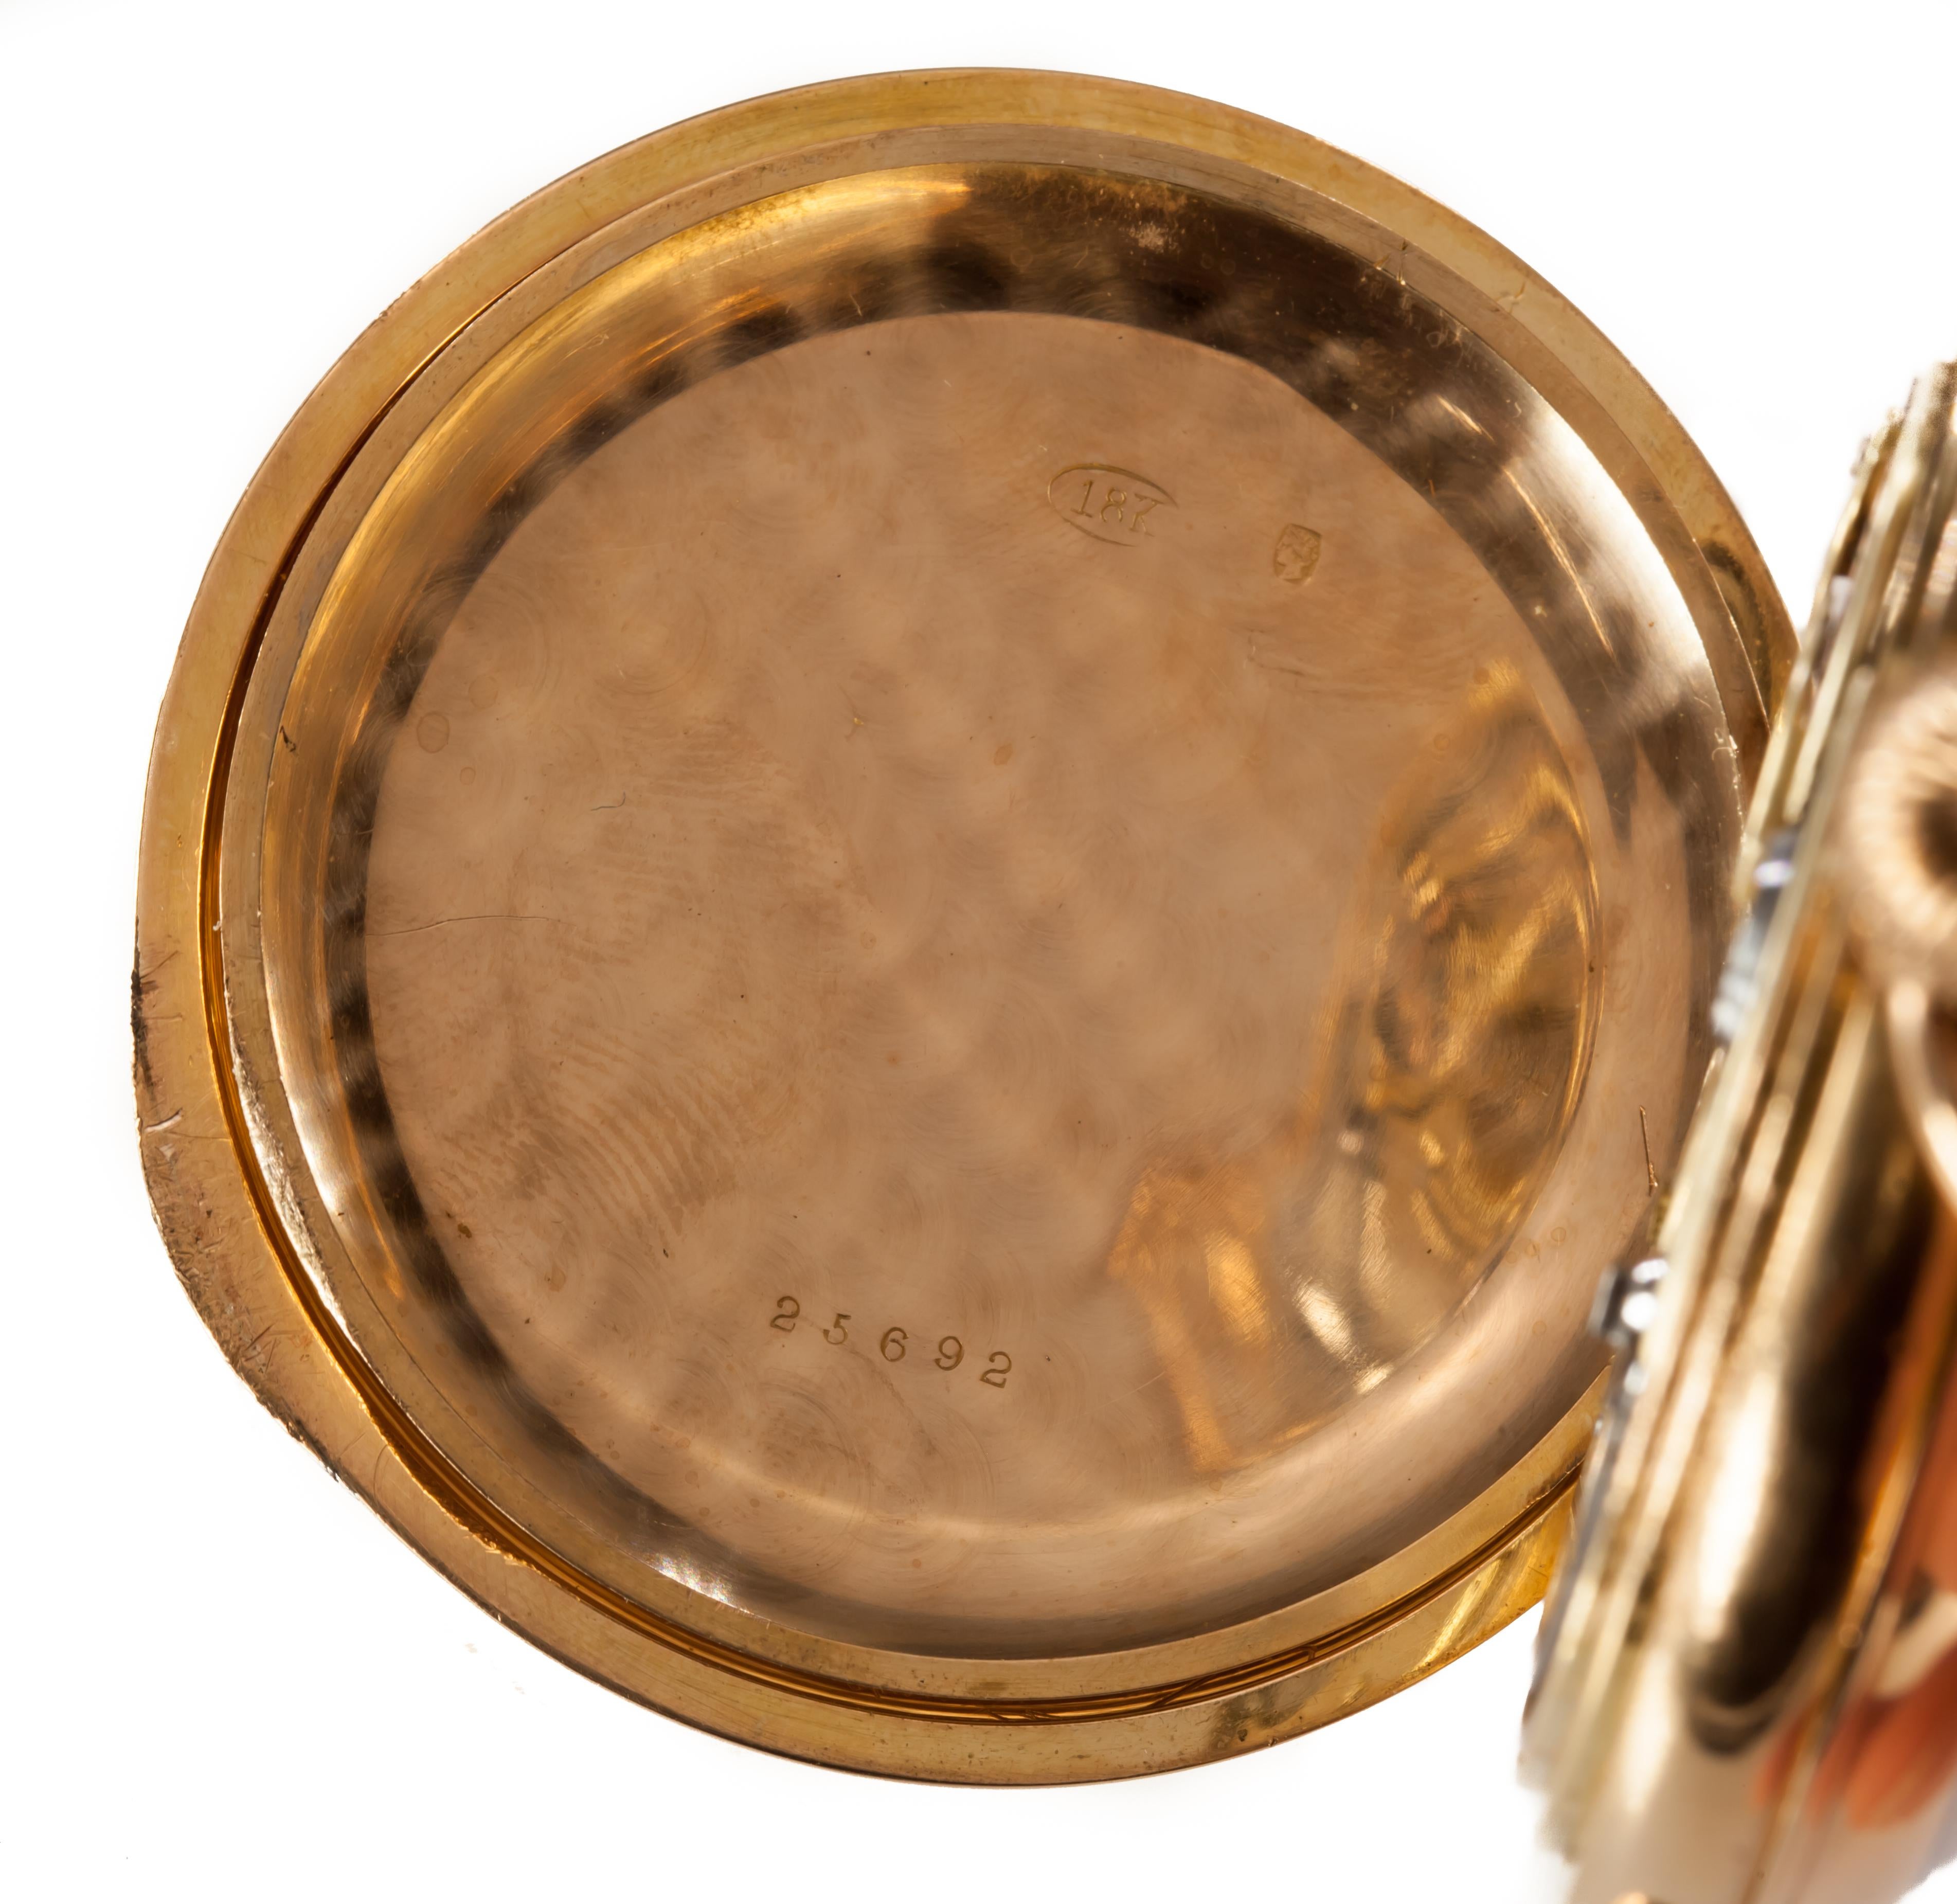 Le Phare 18 Karat Yellow Gold Minute Repeater Open Face Pocket Watch In Good Condition For Sale In Sherman Oaks, CA